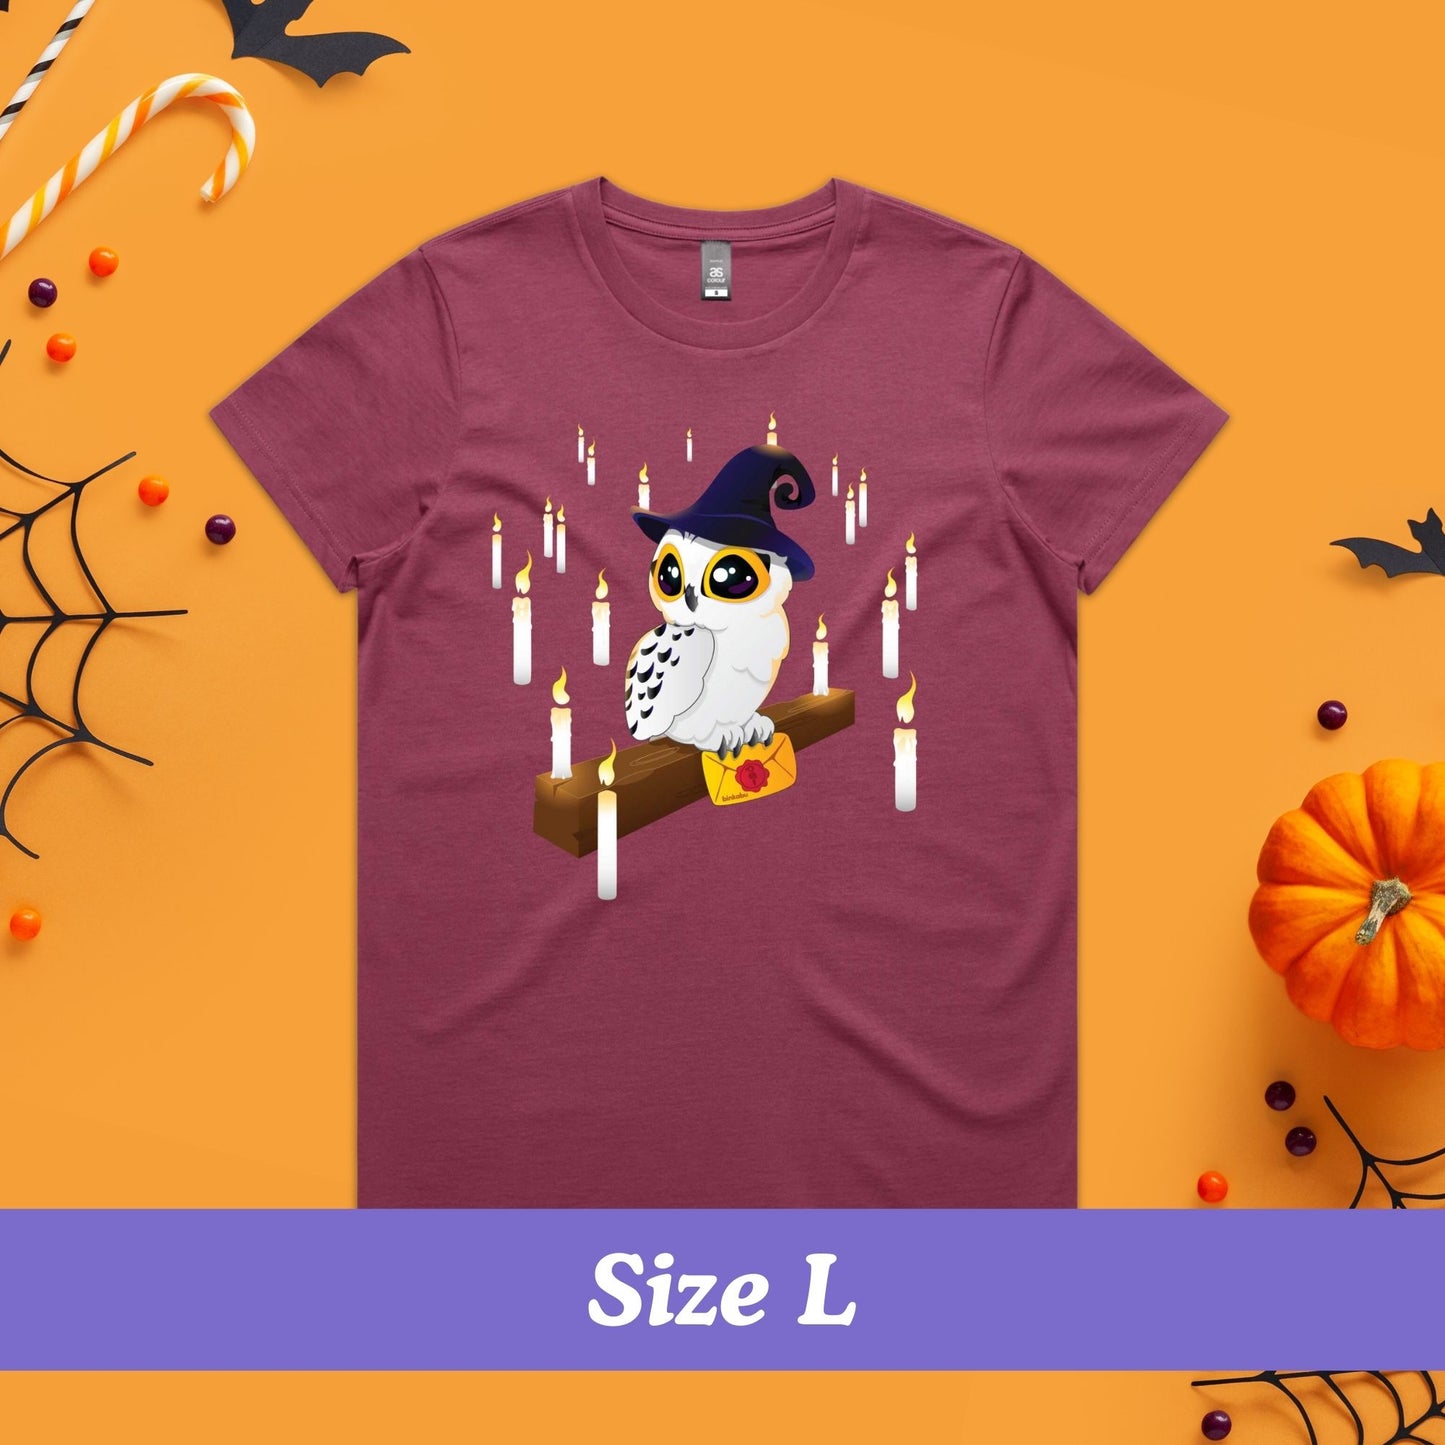 Halloween Women's/Adult Printed Tee - Snowy Owl Witch